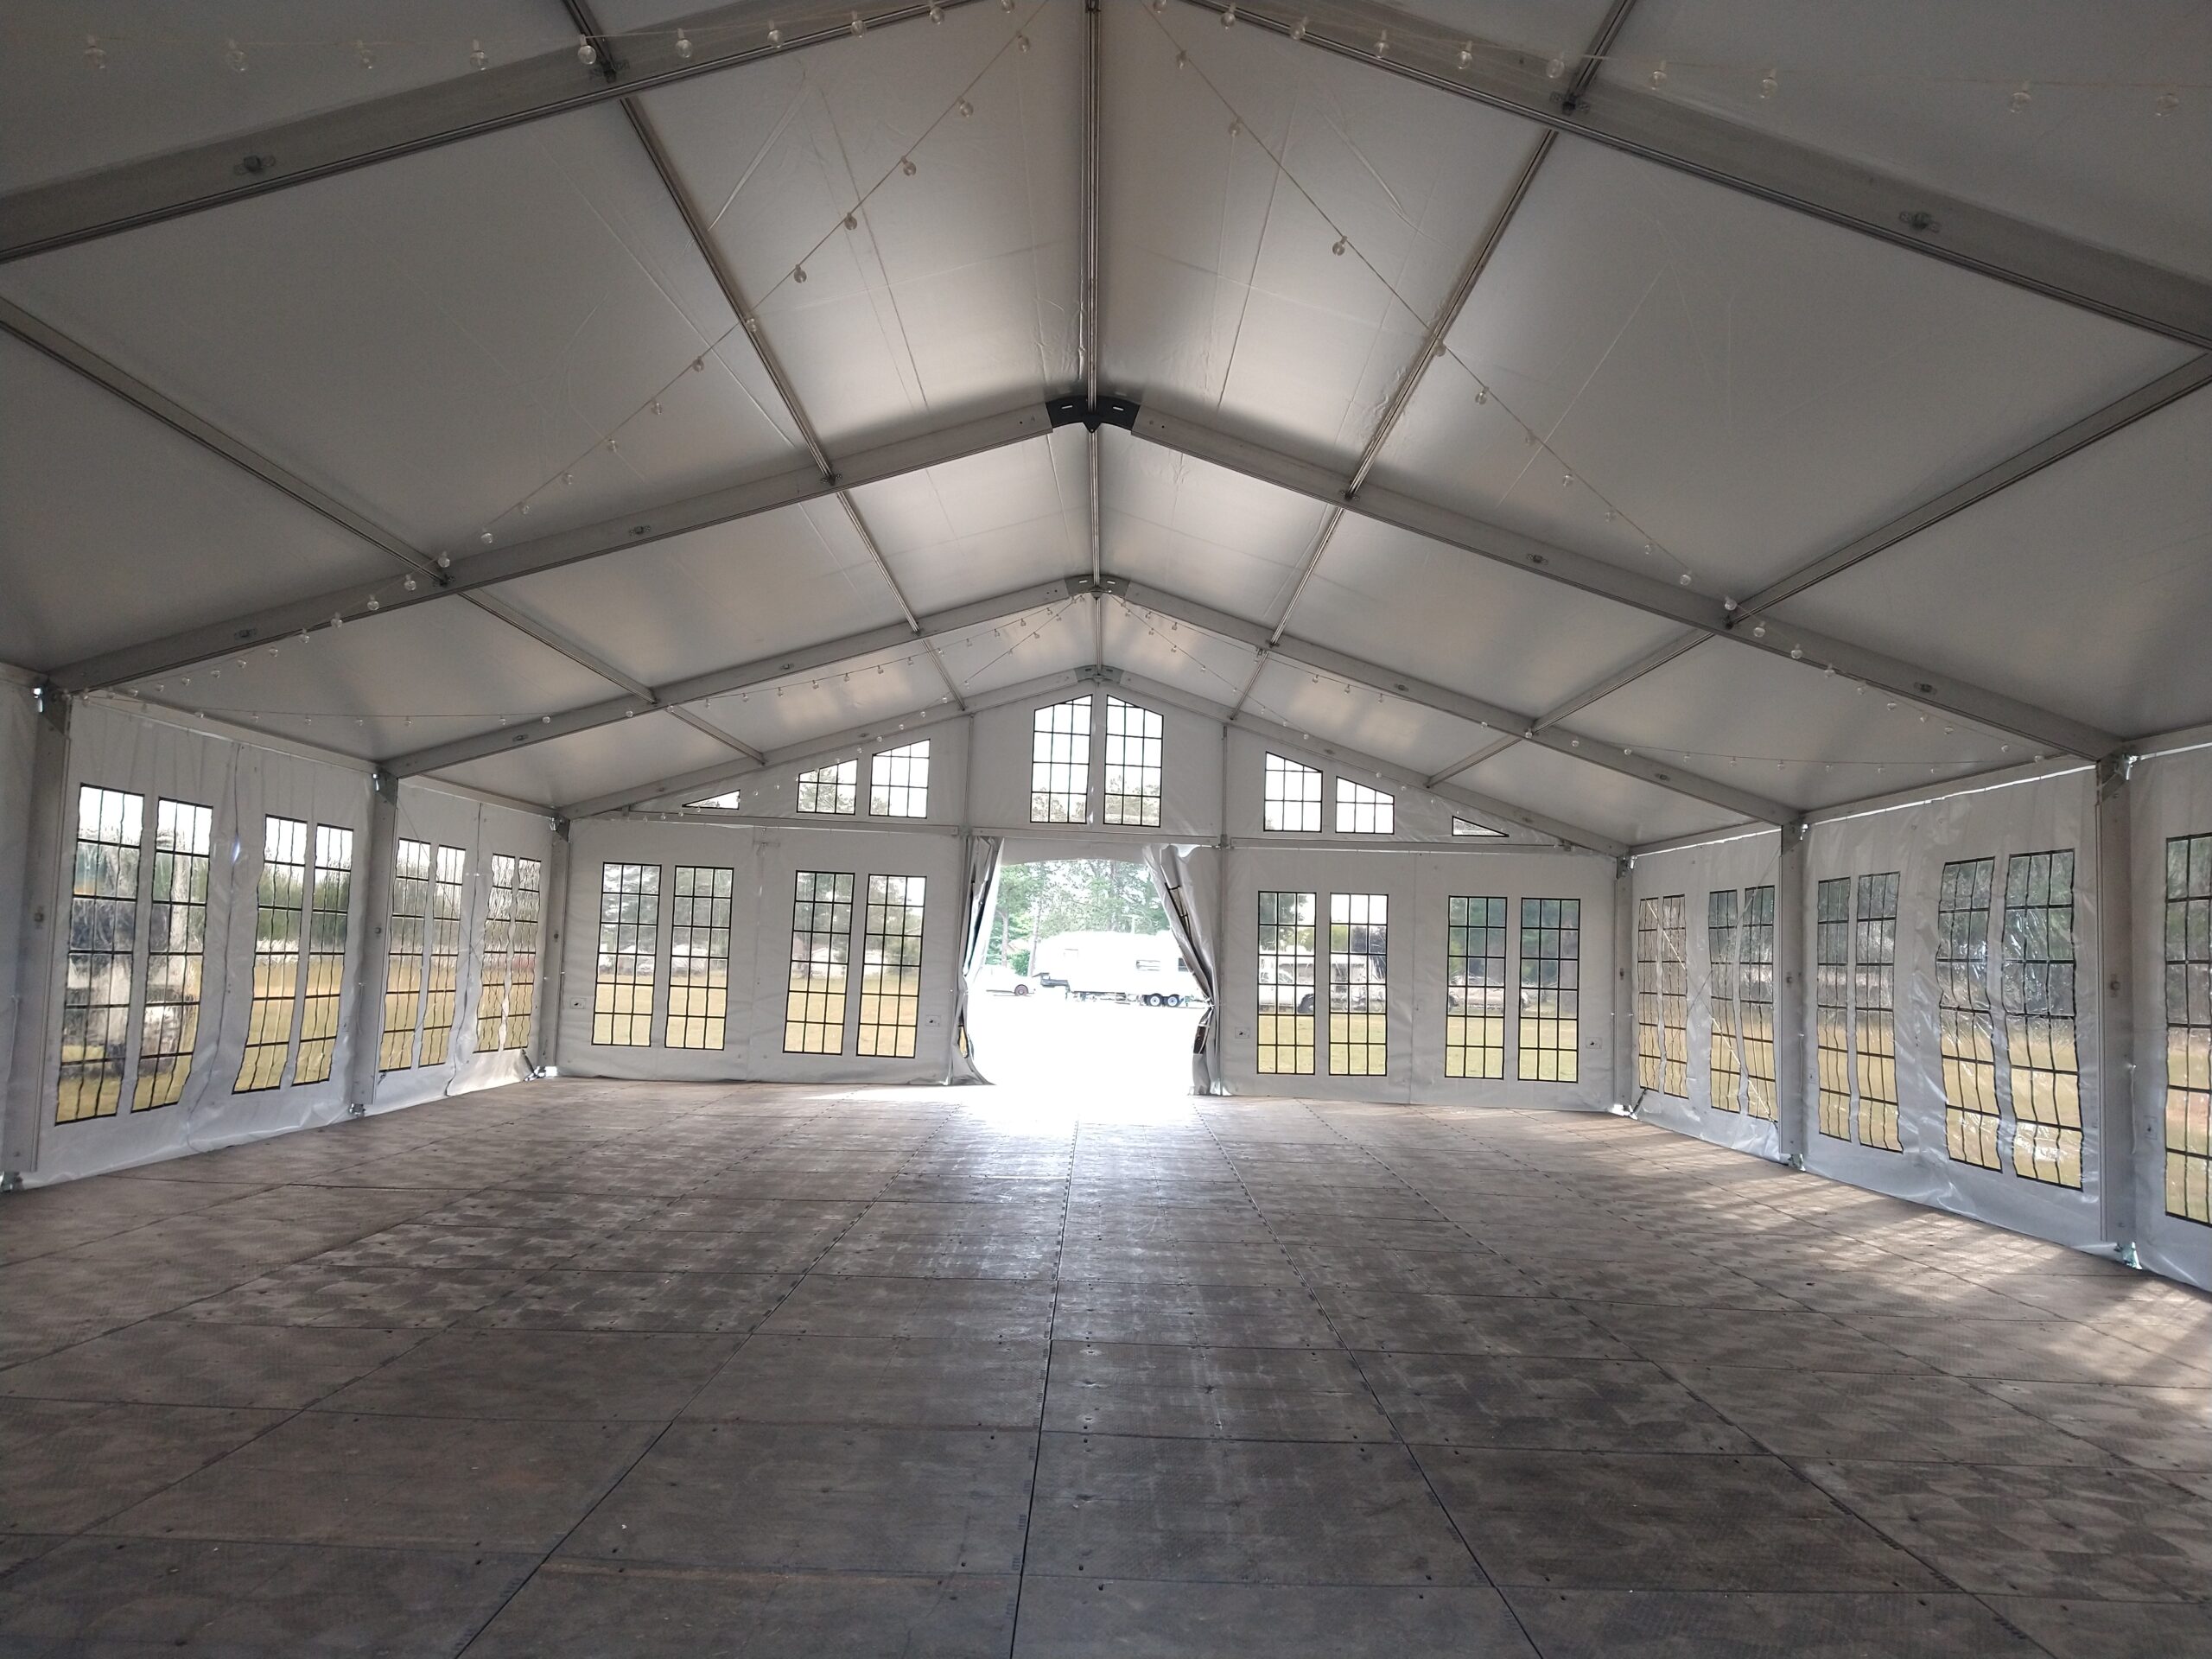 40 wide Structure Tent